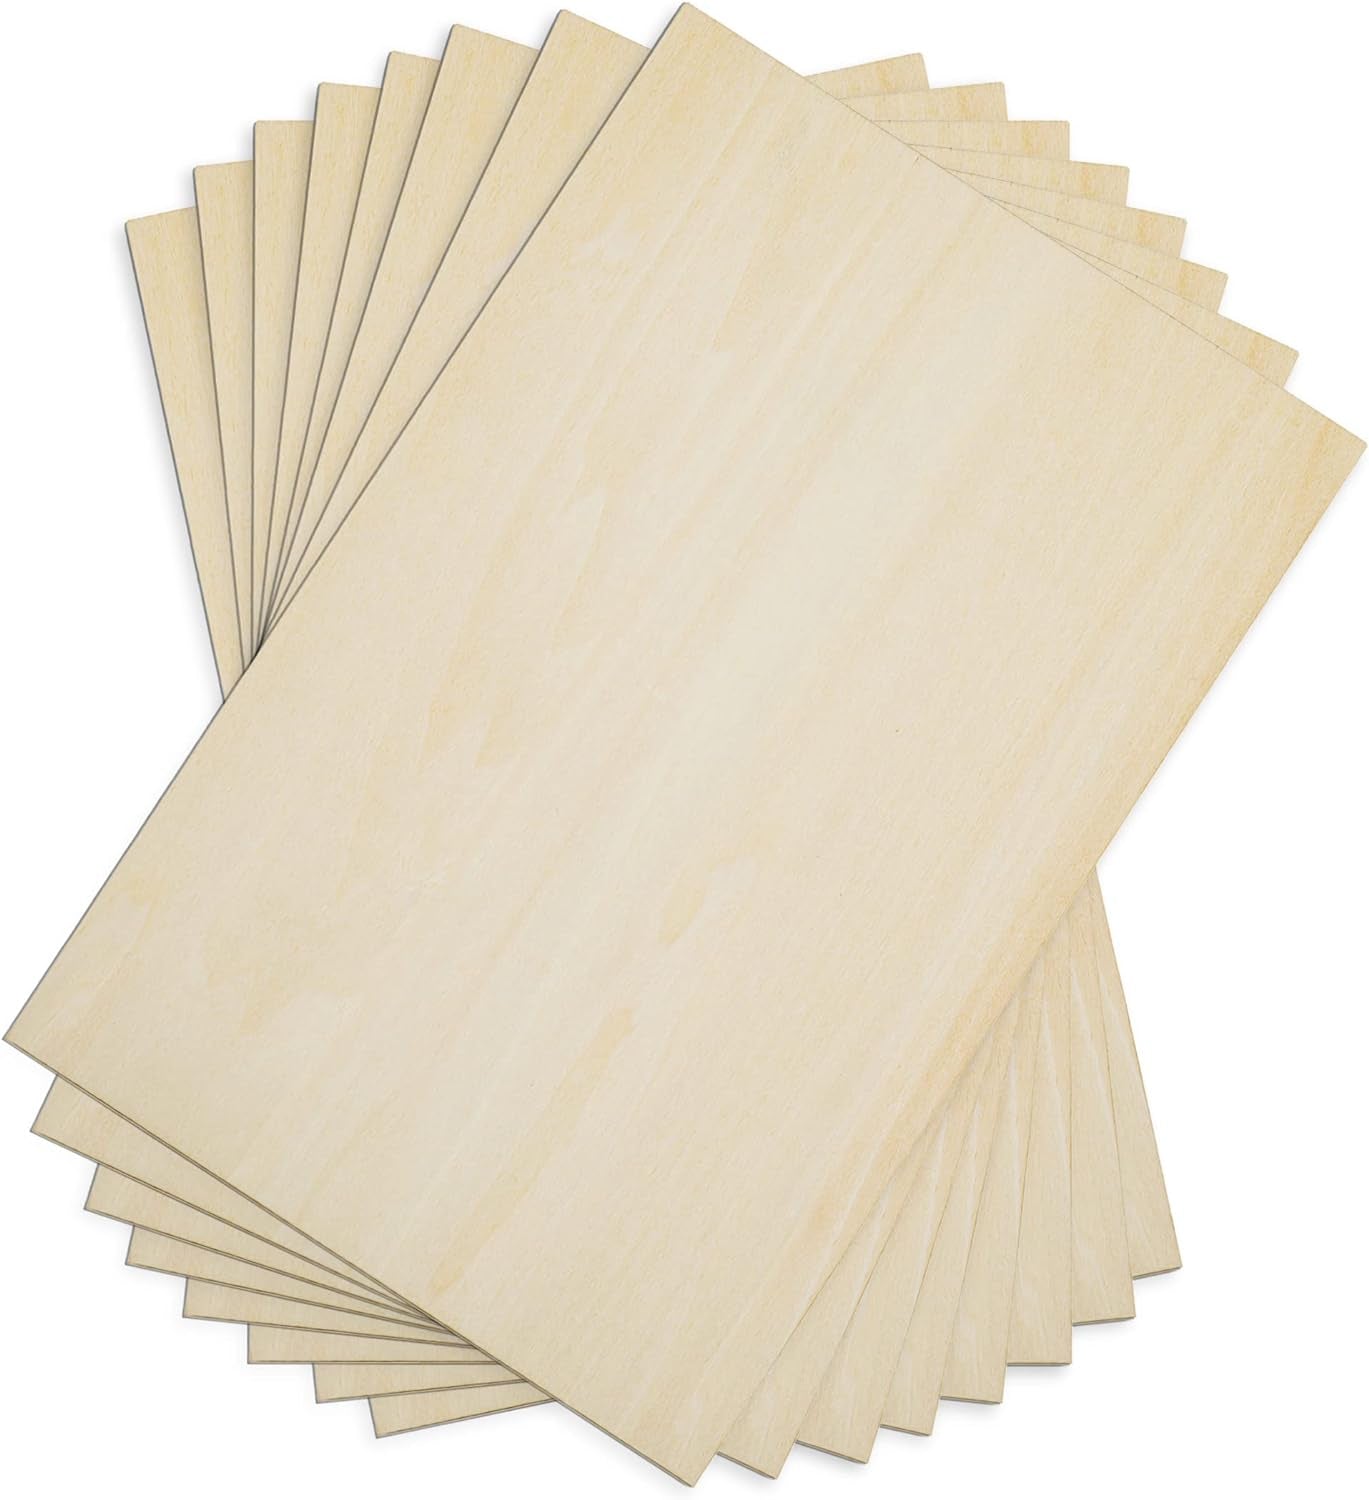 Unfinished Wood, 6 Pack Basswood Sheets for Crafts, Craft Wood Board for House Aircraft Ship Boat Arts and Crafts, School Projects, Wooden DIY Ornaments